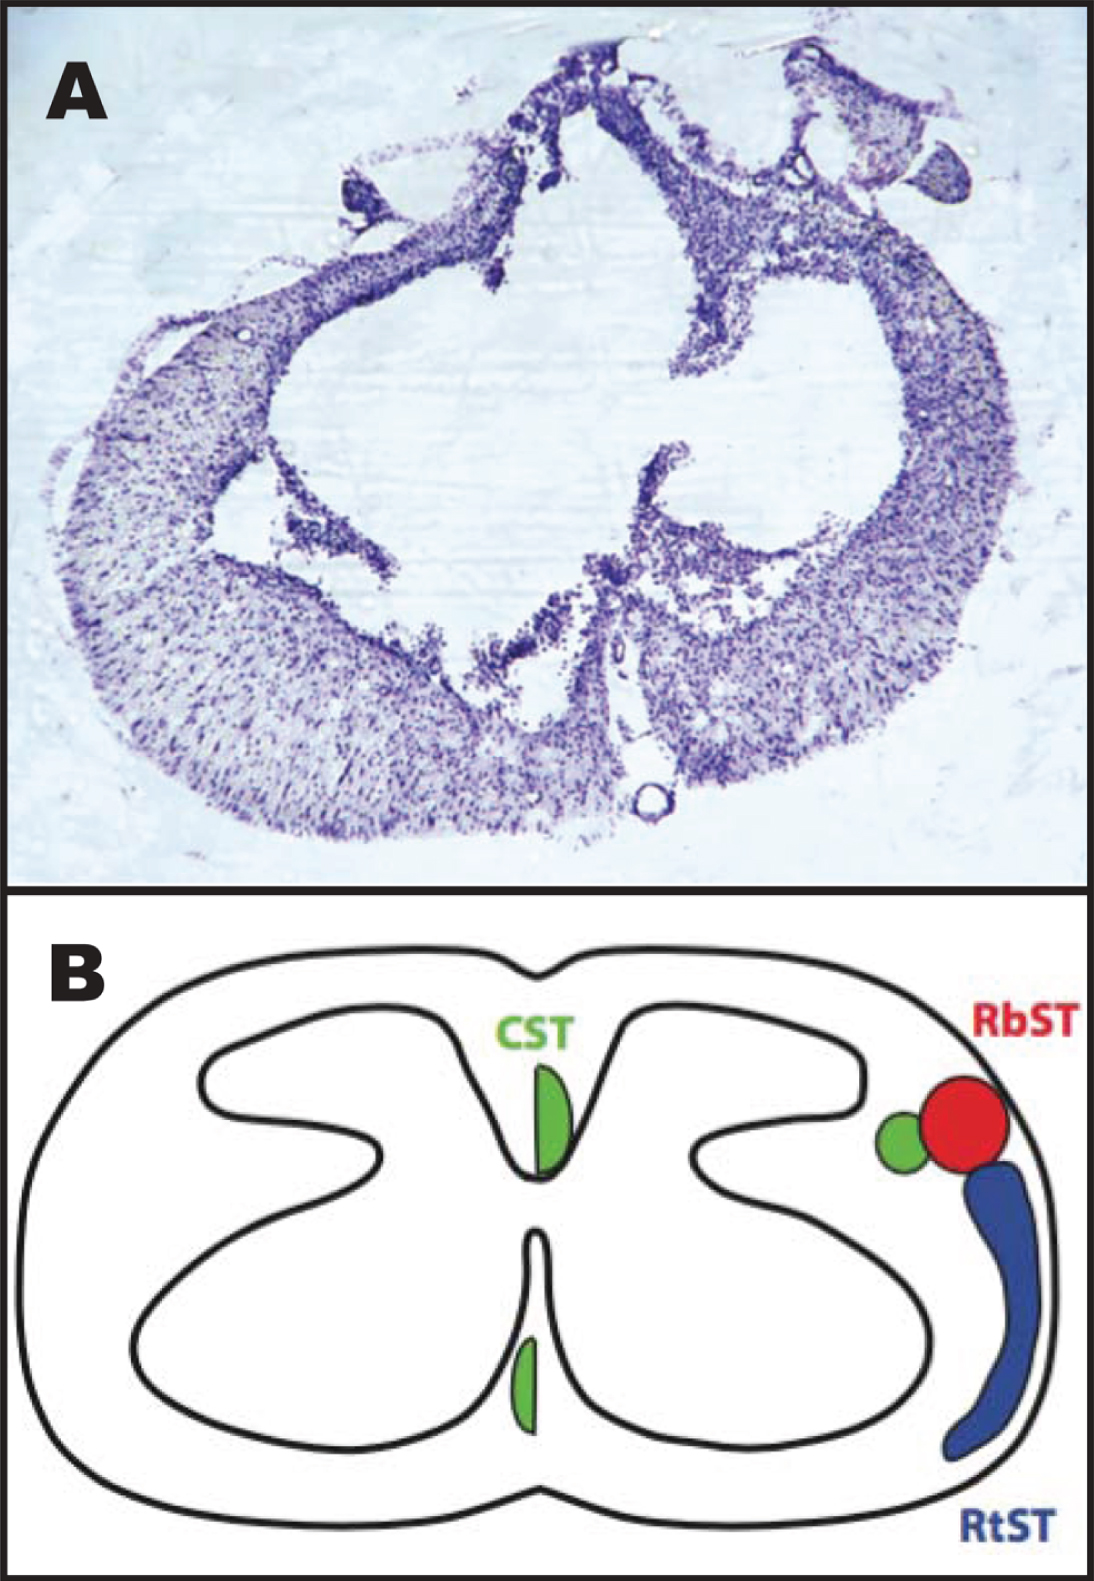 Representative image of the spinal cord injury epicenter 4 weeks after injury. A: Transverse section stained with a cresyl violet acetate solution. B: Schematic diagram showing the location of descending motor tracts (Lemon, 2008): the corticospinal tract (CST; green), rubrospinal tract (RbST; red), and reticulospinal tract (RtST; blue).